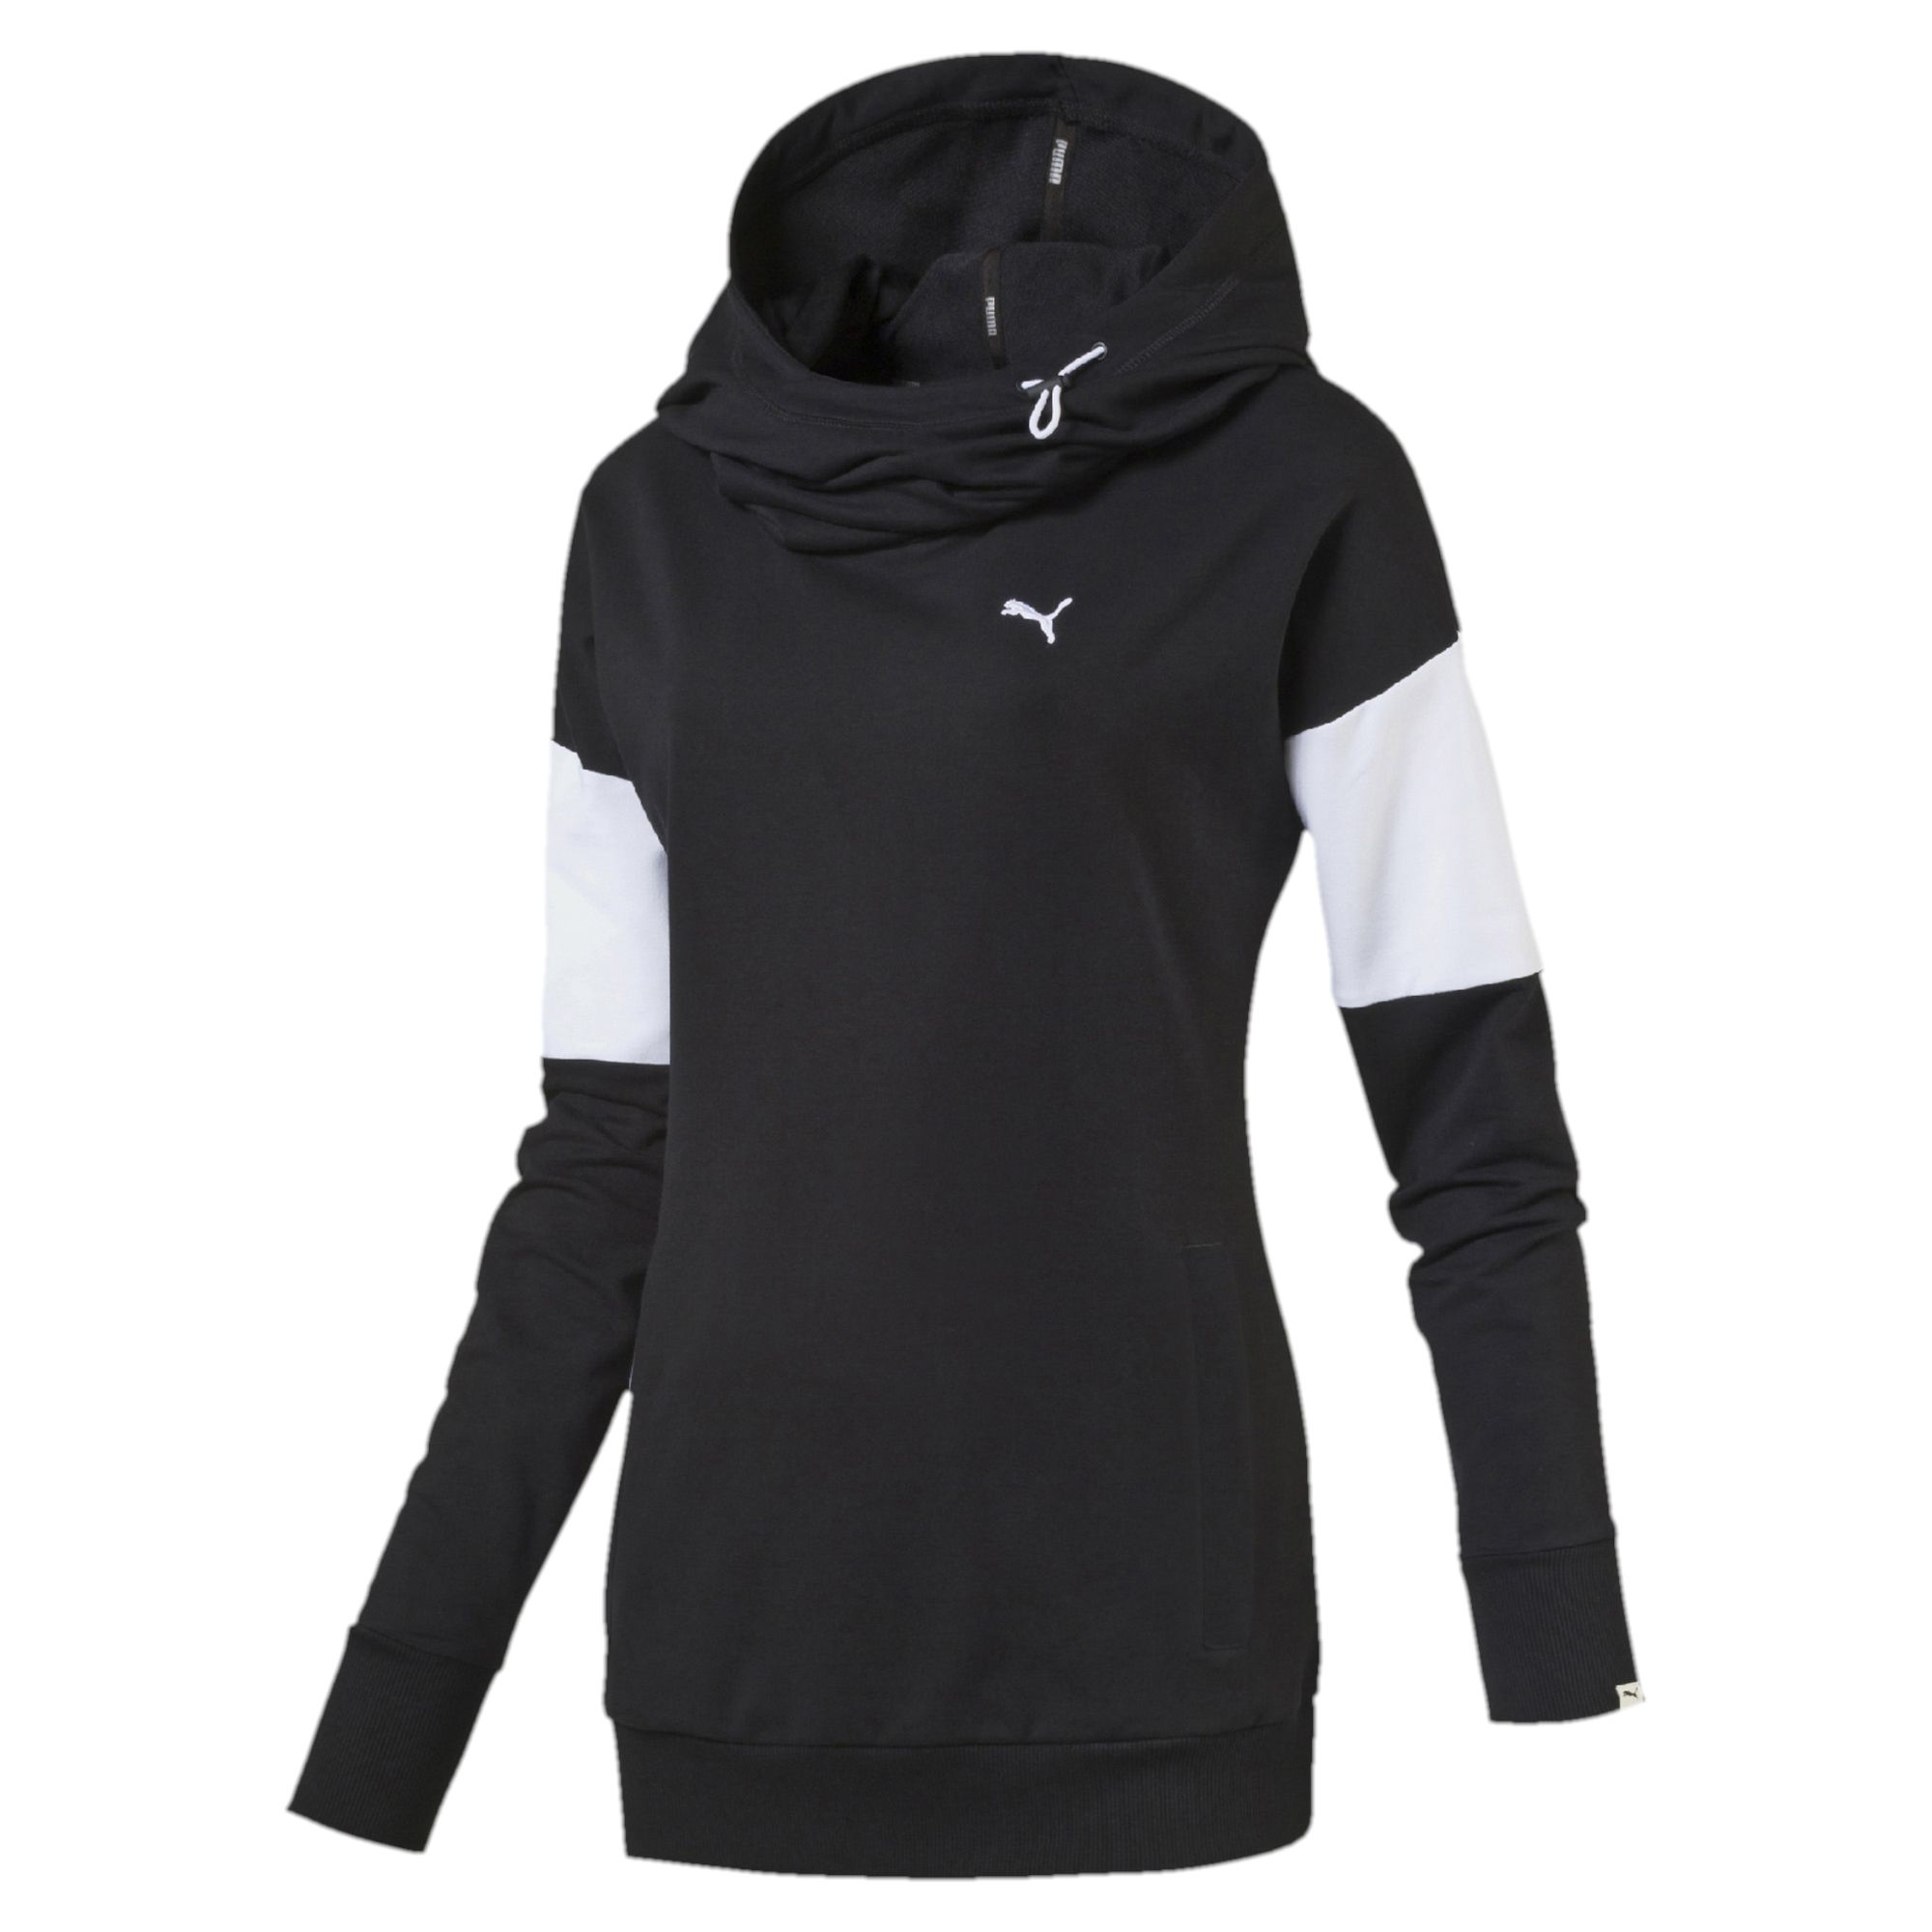 puma style swagger hoodie